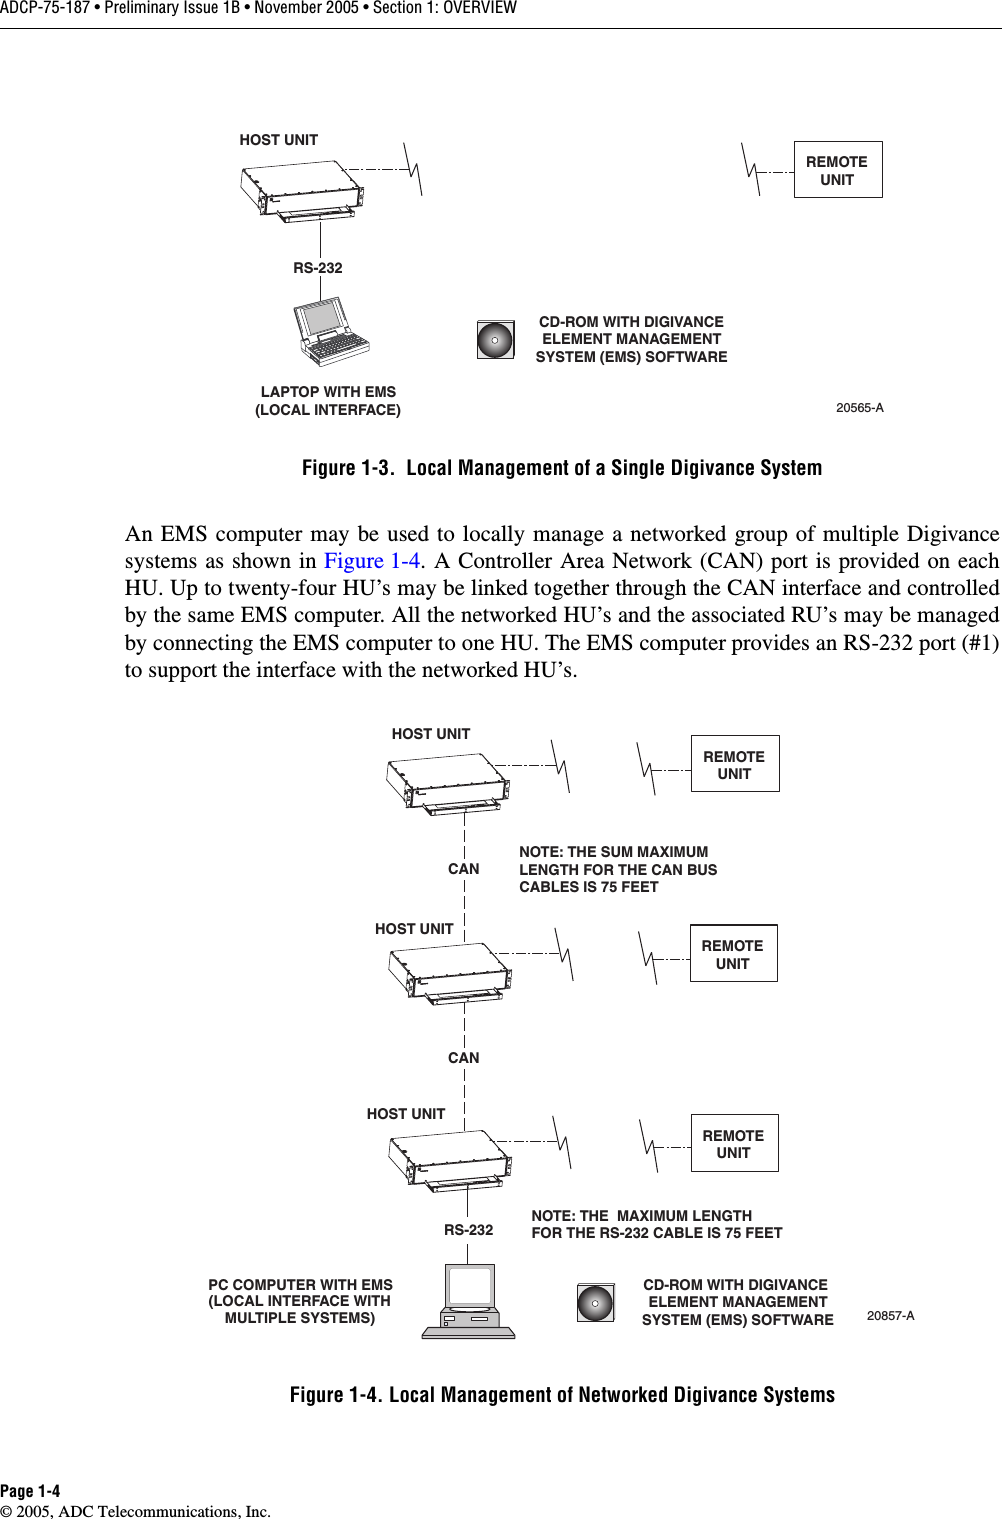 ADCP-75-187 • Preliminary Issue 1B • November 2005 • Section 1: OVERVIEWPage 1-4© 2005, ADC Telecommunications, Inc.Figure 1-3.  Local Management of a Single Digivance SystemAn EMS computer may be used to locally manage a networked group of multiple Digivancesystems as shown in Figure 1-4. A Controller Area Network (CAN) port is provided on eachHU. Up to twenty-four HU’s may be linked together through the CAN interface and controlledby the same EMS computer. All the networked HU’s and the associated RU’s may be managedby connecting the EMS computer to one HU. The EMS computer provides an RS-232 port (#1)to support the interface with the networked HU’s. Figure 1-4. Local Management of Networked Digivance SystemsHOST UNITLAPTOP WITH EMS(LOCAL INTERFACE)20565-ACD-ROM WITH DIGIVANCEELEMENT MANAGEMENTSYSTEM (EMS) SOFTWAREREMOTEUNITRS-232PC COMPUTER WITH EMS(LOCAL INTERFACE WITHMULTIPLE SYSTEMS)HOST UNITHOST UNITHOST UNITRS-23220857-ACD-ROM WITH DIGIVANCE ELEMENT MANAGEMENTSYSTEM (EMS) SOFTWARECANCANREMOTEUNITREMOTEUNITREMOTEUNITNOTE: THE  MAXIMUM LENGTHFOR THE RS-232 CABLE IS 75 FEETNOTE: THE SUM MAXIMUMLENGTH FOR THE CAN BUSCABLES IS 75 FEET